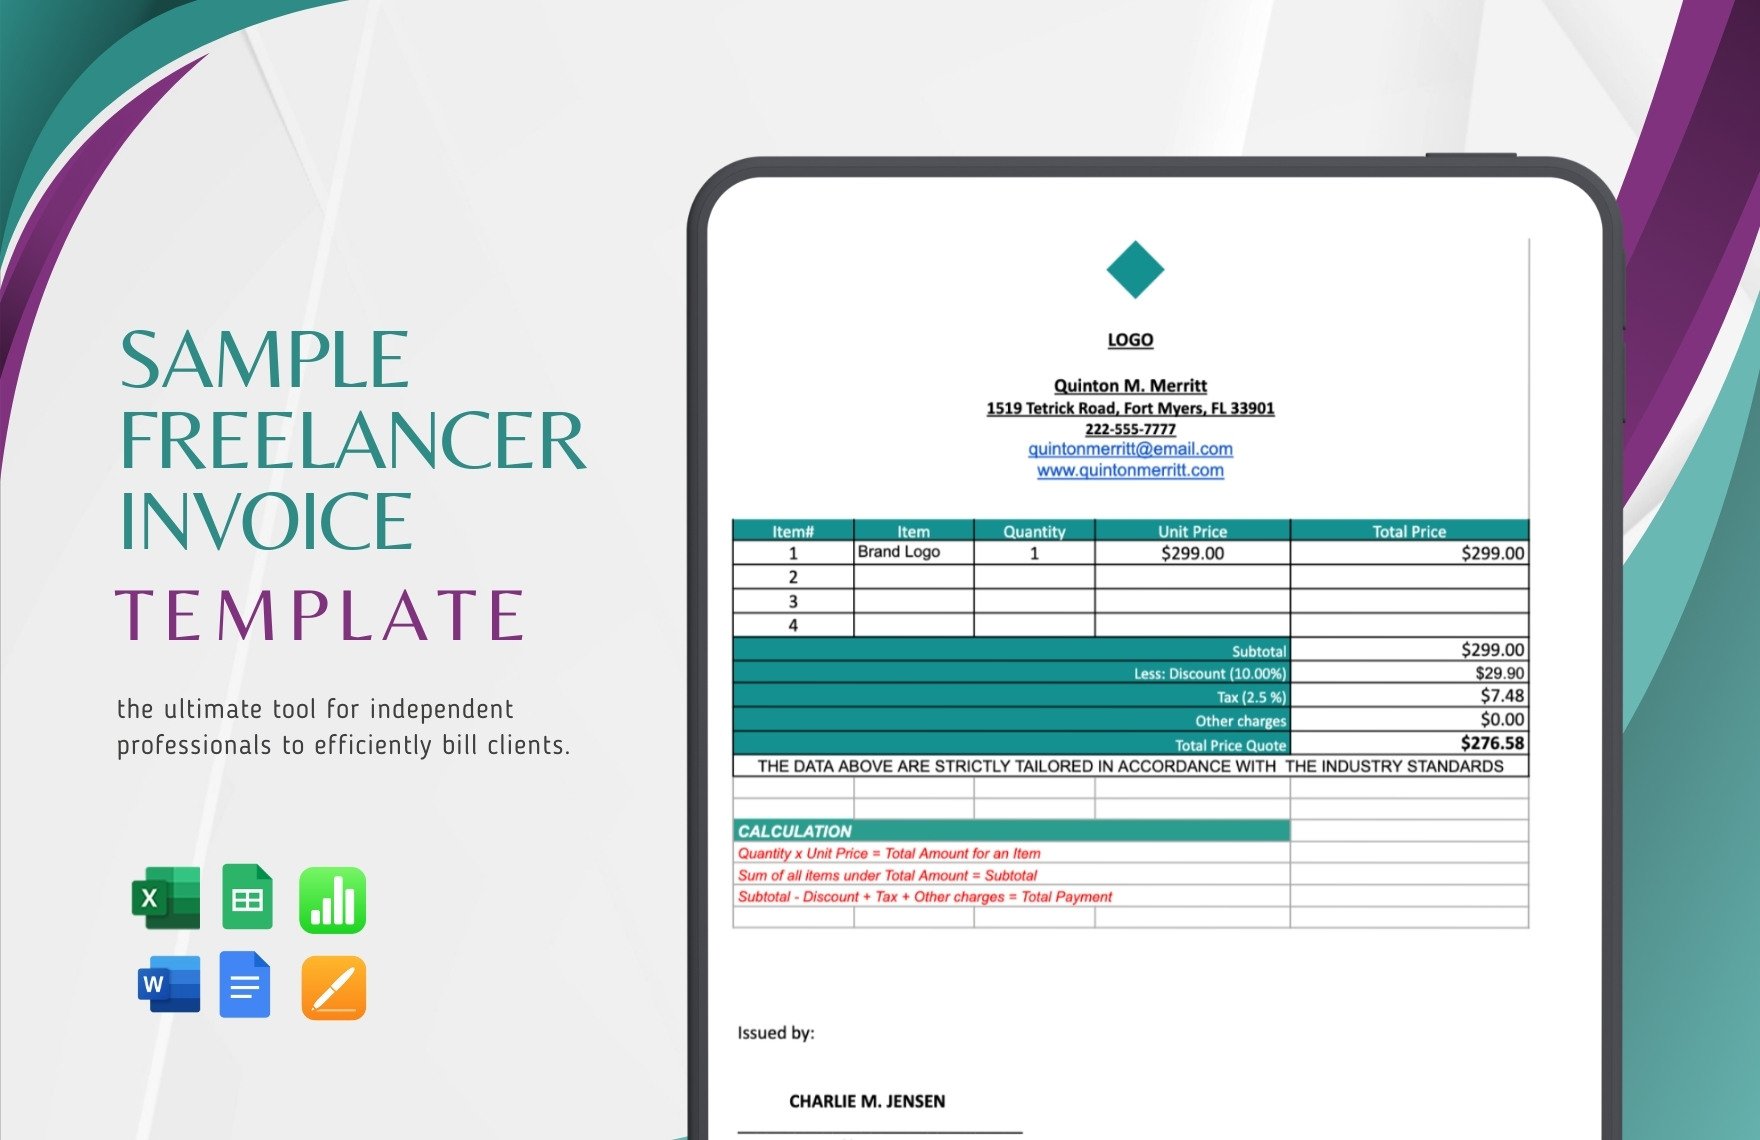 Sample Freelancer Invoice Template in Word, Google Docs, Excel, Google Sheets, Apple Pages, Apple Numbers